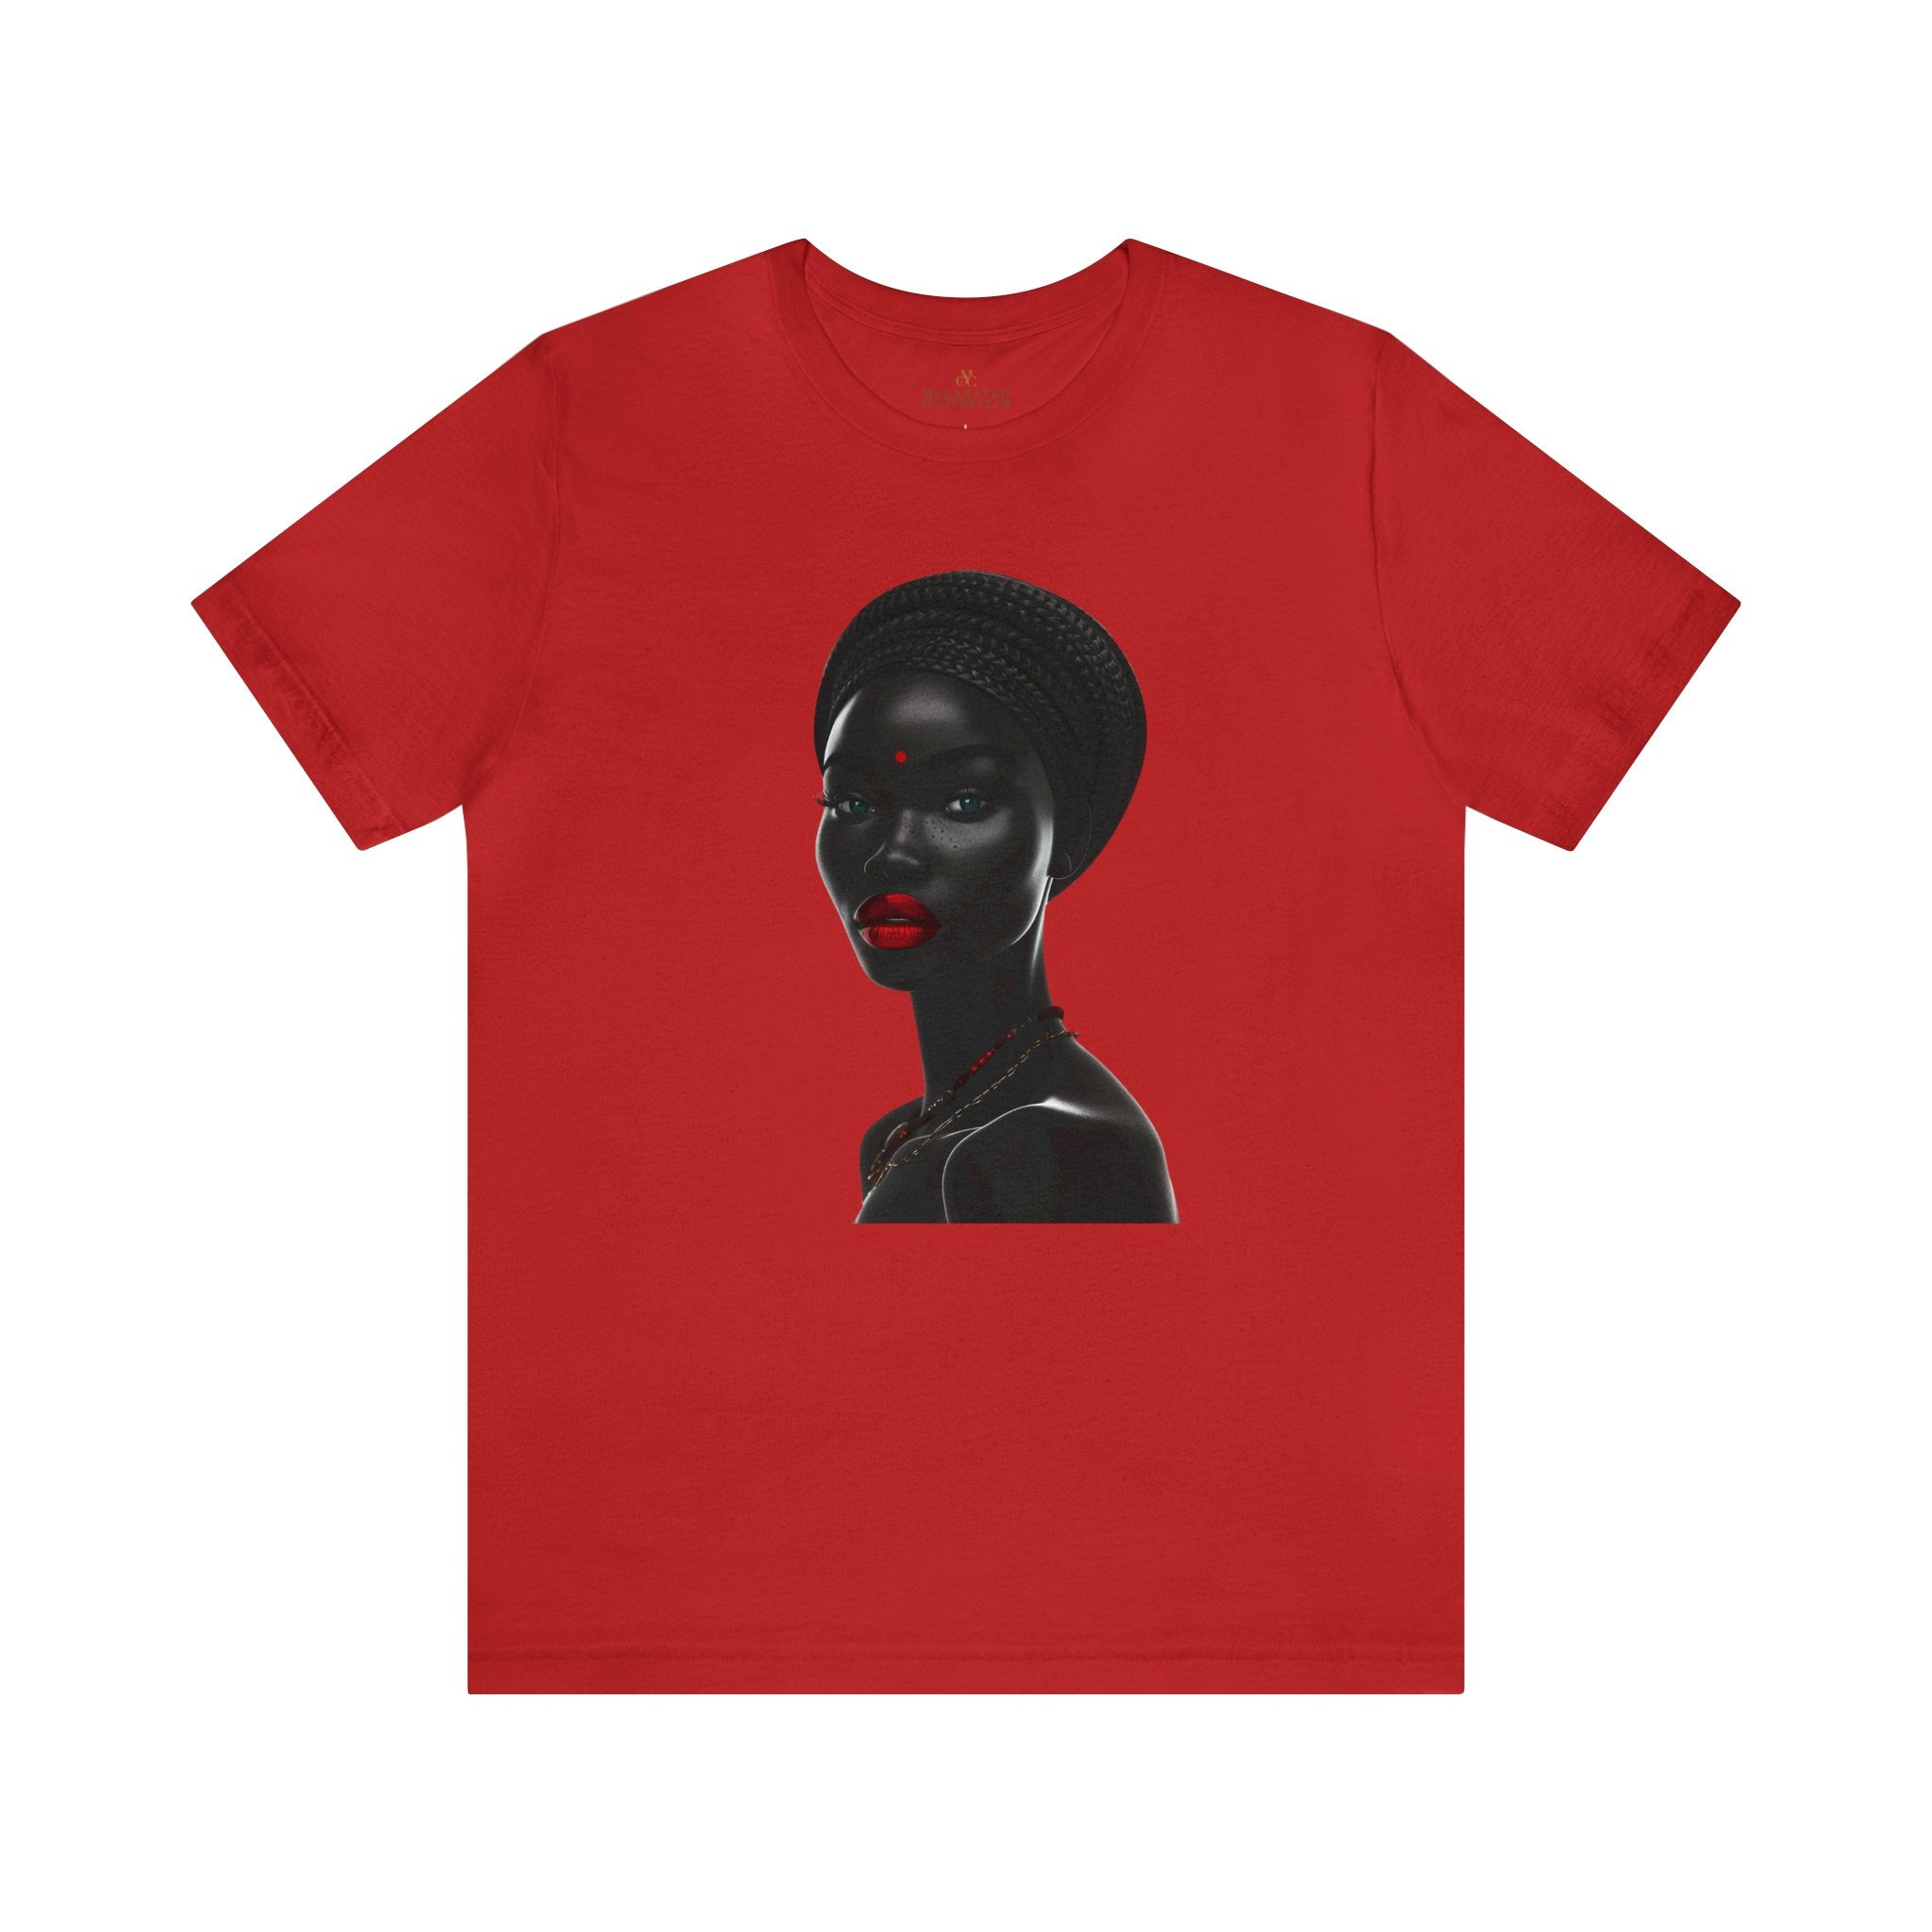 Afrocentric Black Beauty tee shirt in red.